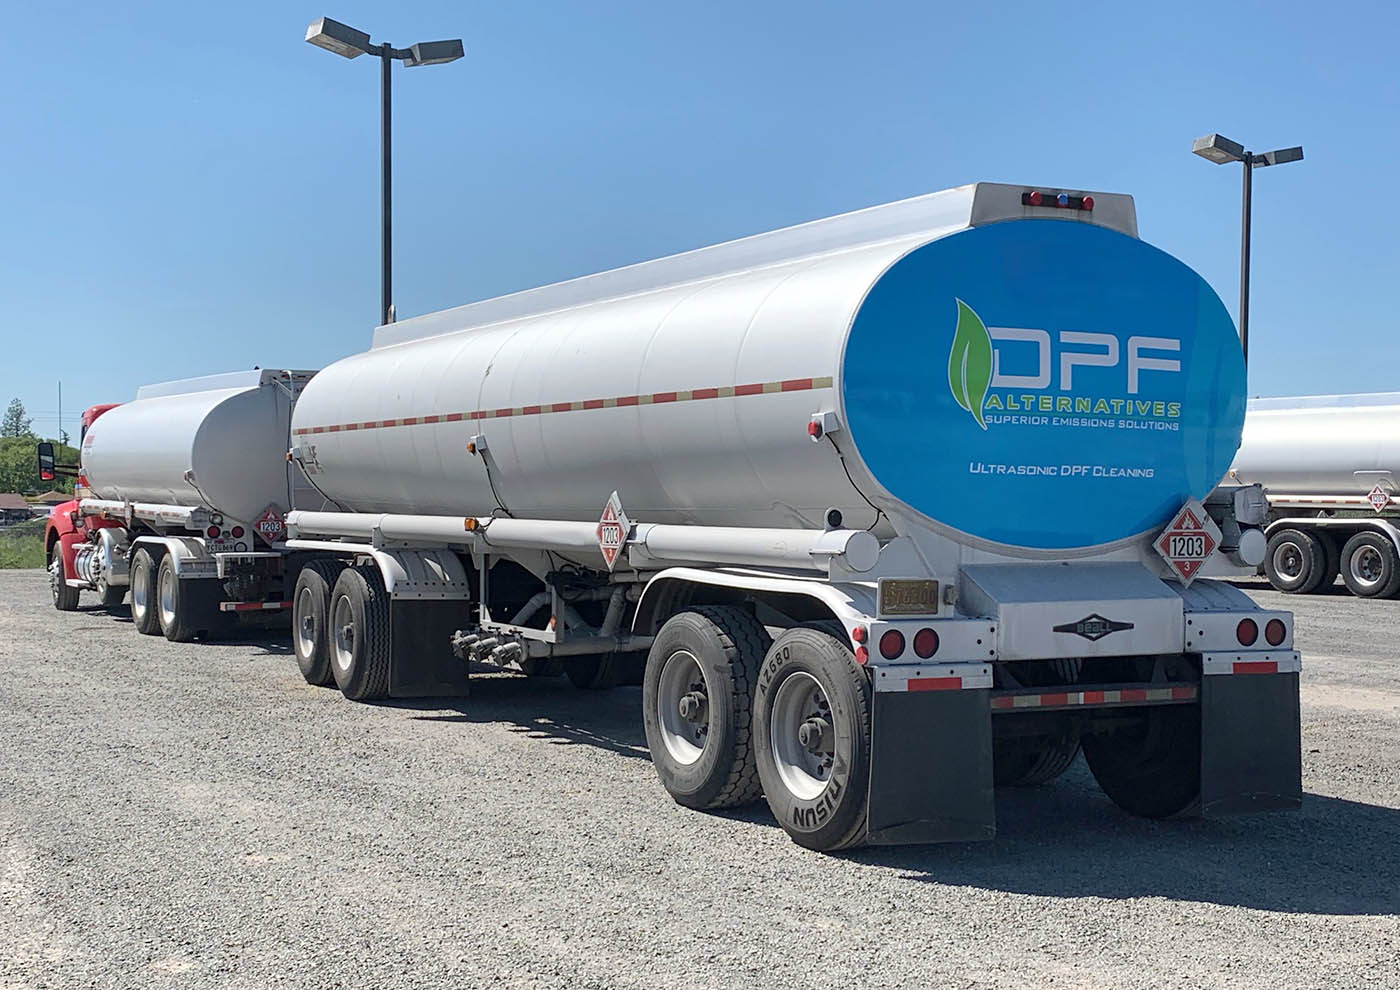 Back of a clean, large, reflective semi truck rig, contact DPF Alternatives for a DPF cleaning in Grand Rapids / Kentwood-Muskegon.